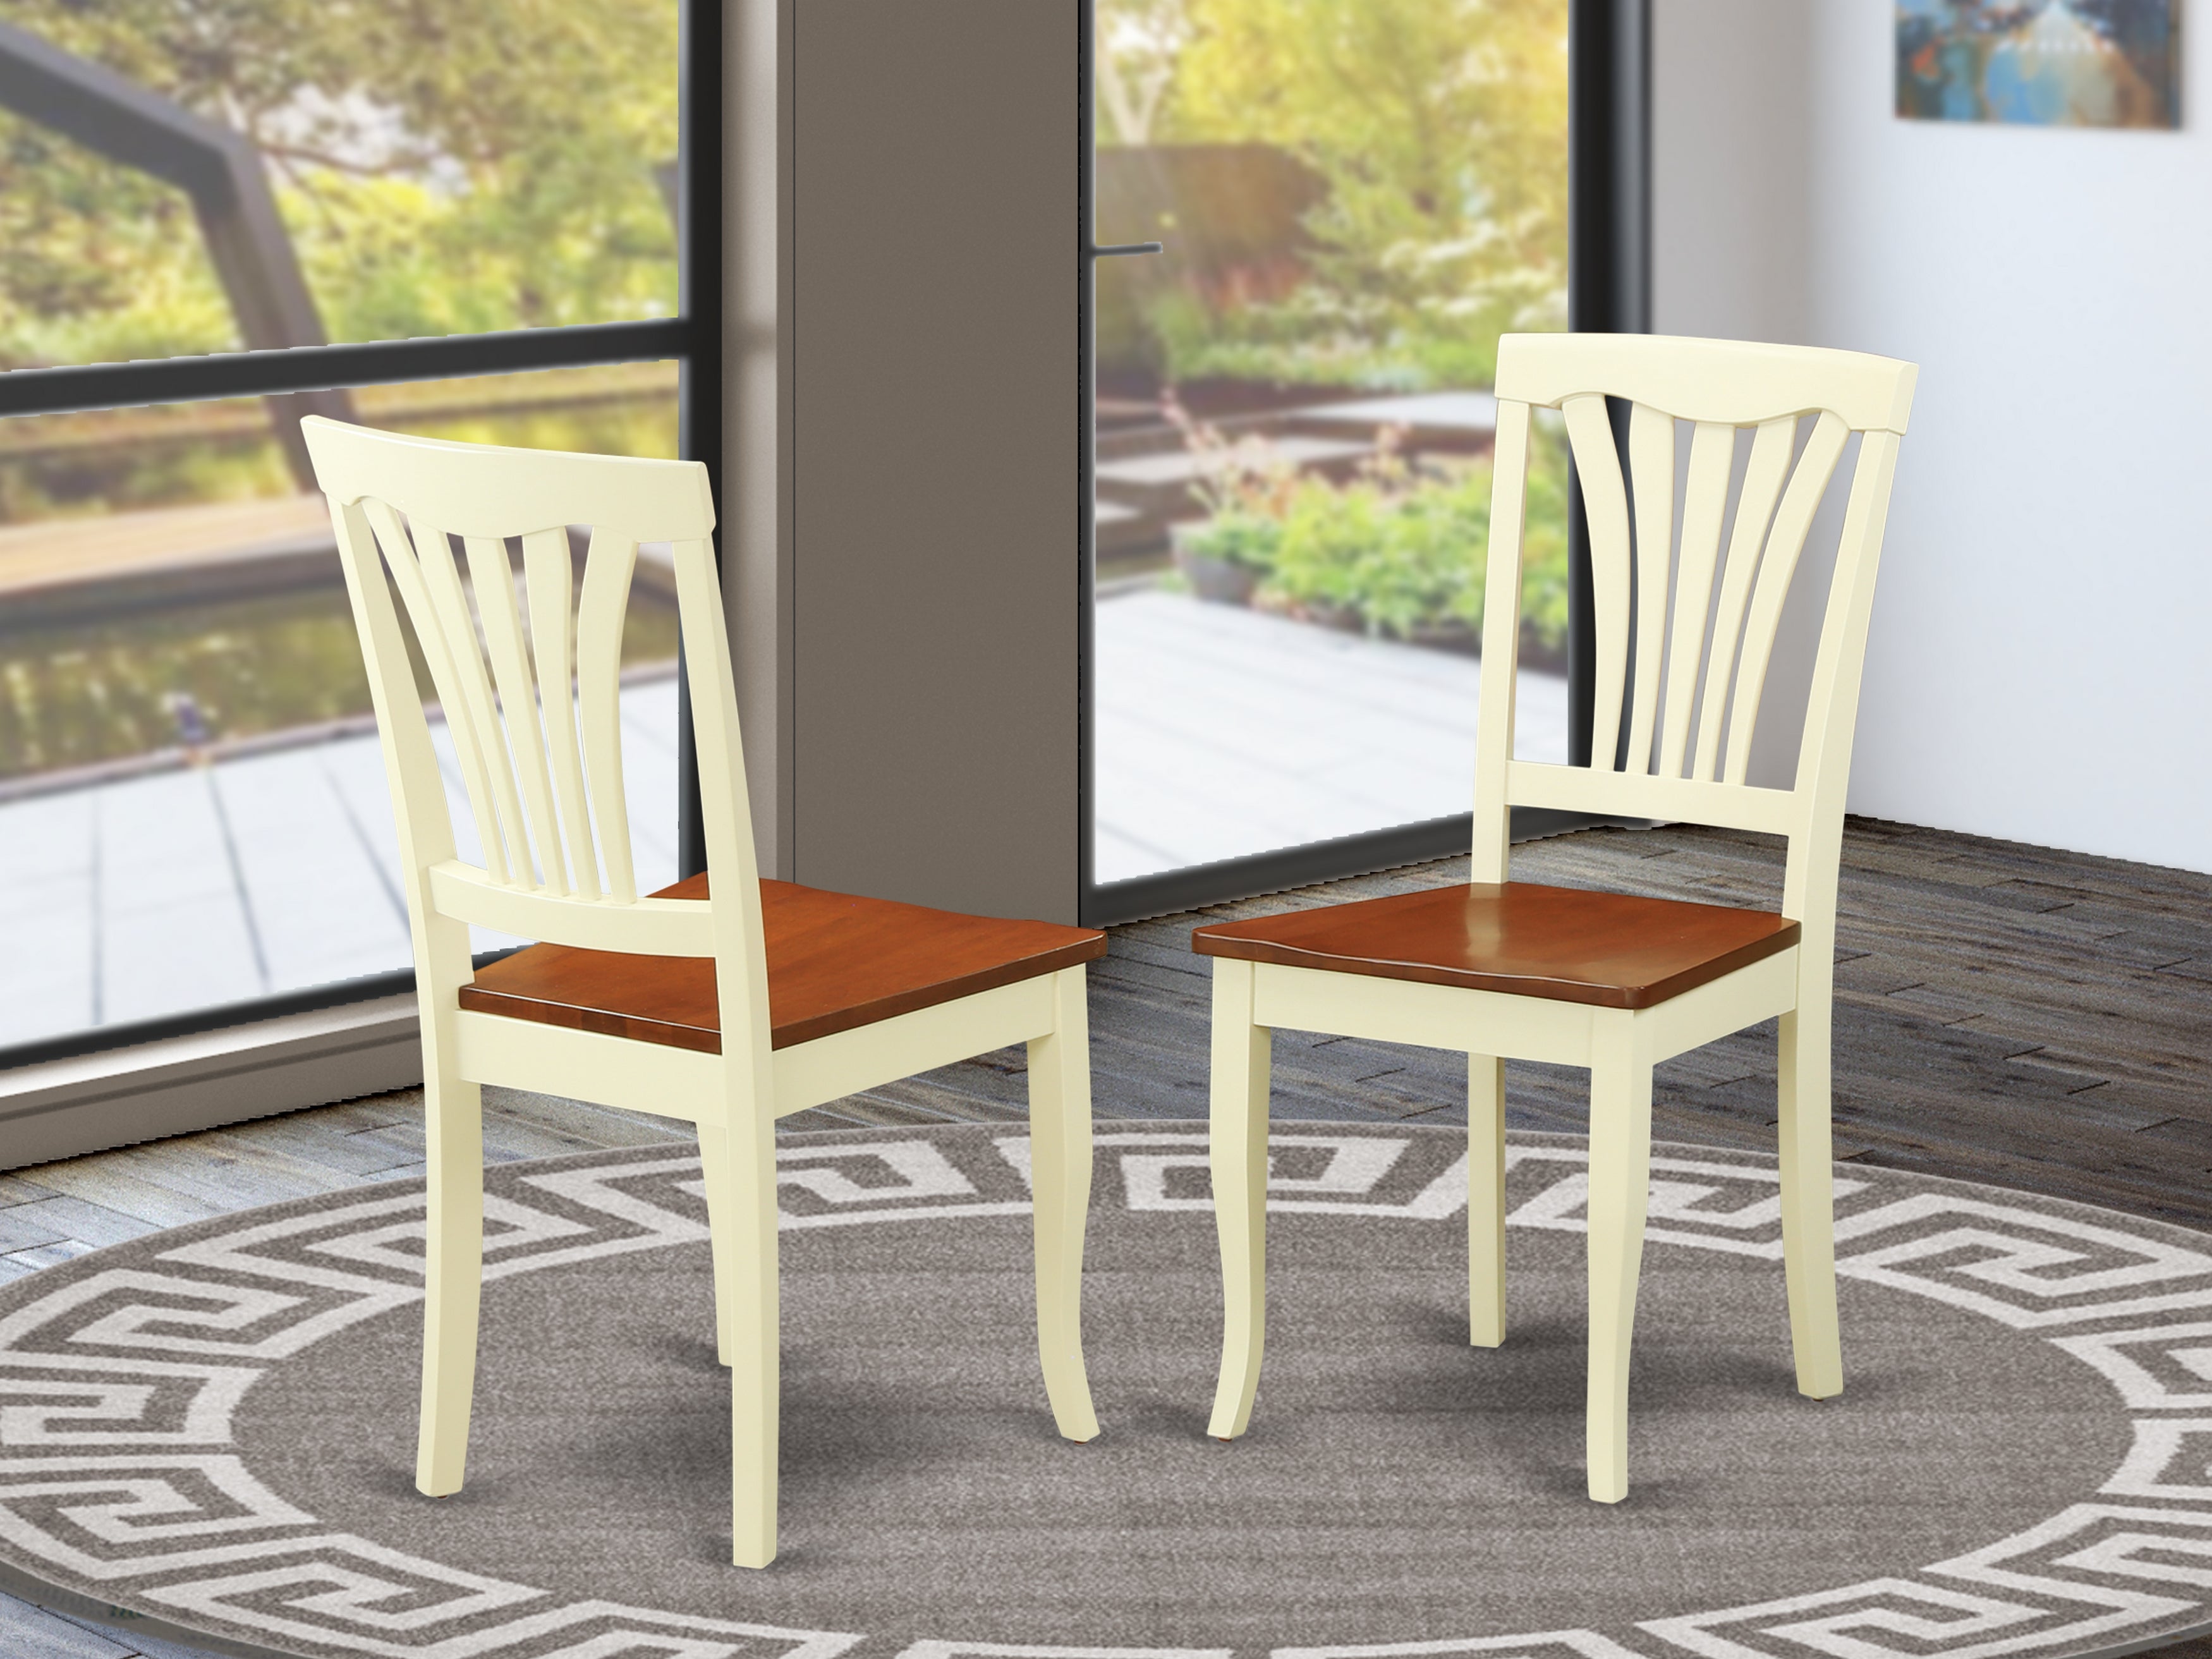 AVC-WHI-W Avon Dining Chair Wood Seat - Buttermilk and Cherry Finish